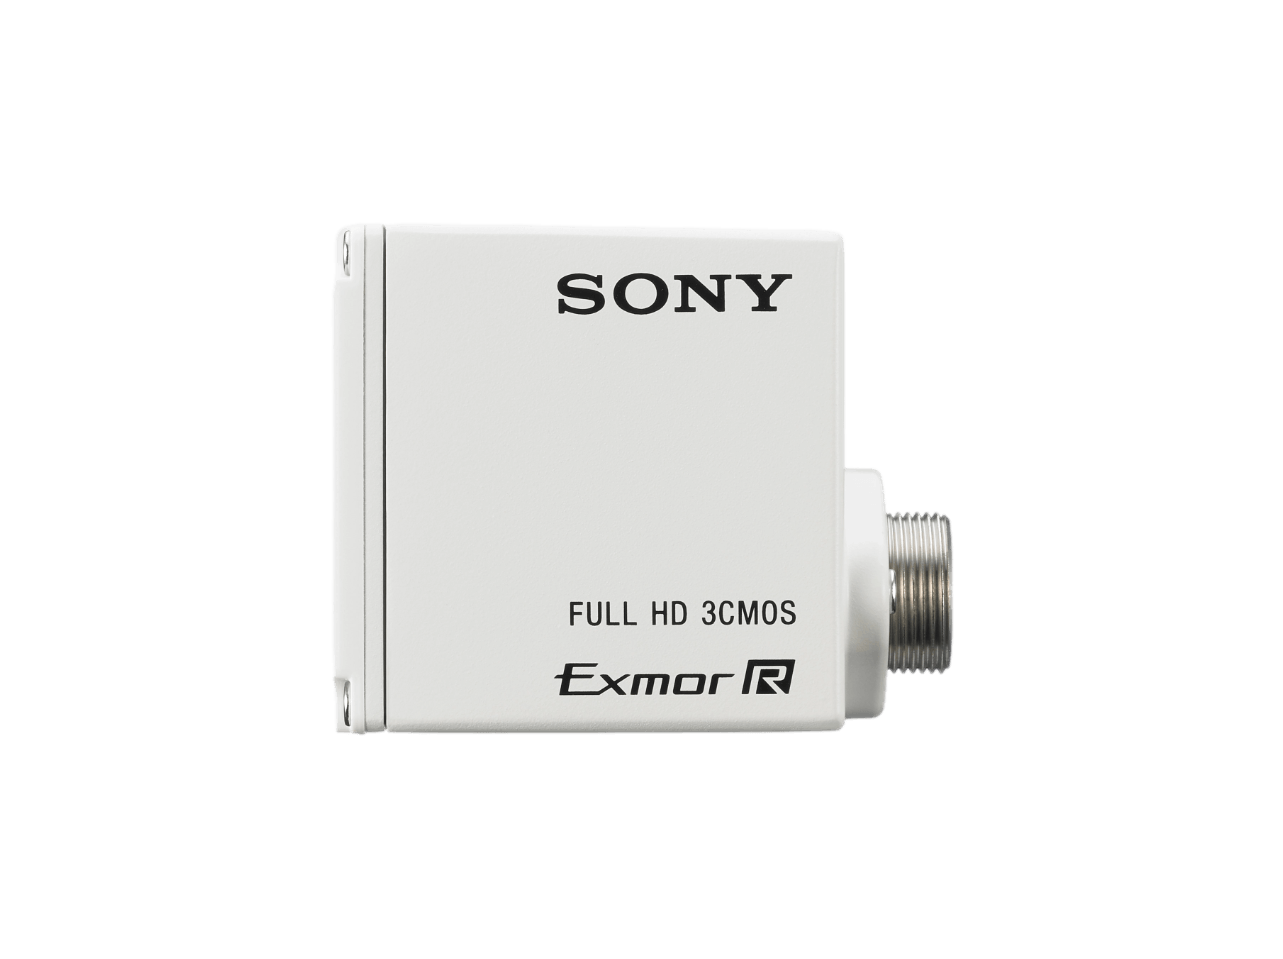 The Sony MCC-1000MD Full HD Surgical Video Camera is designed for medical microsurgical applications including ophthalmology and neurology procedures